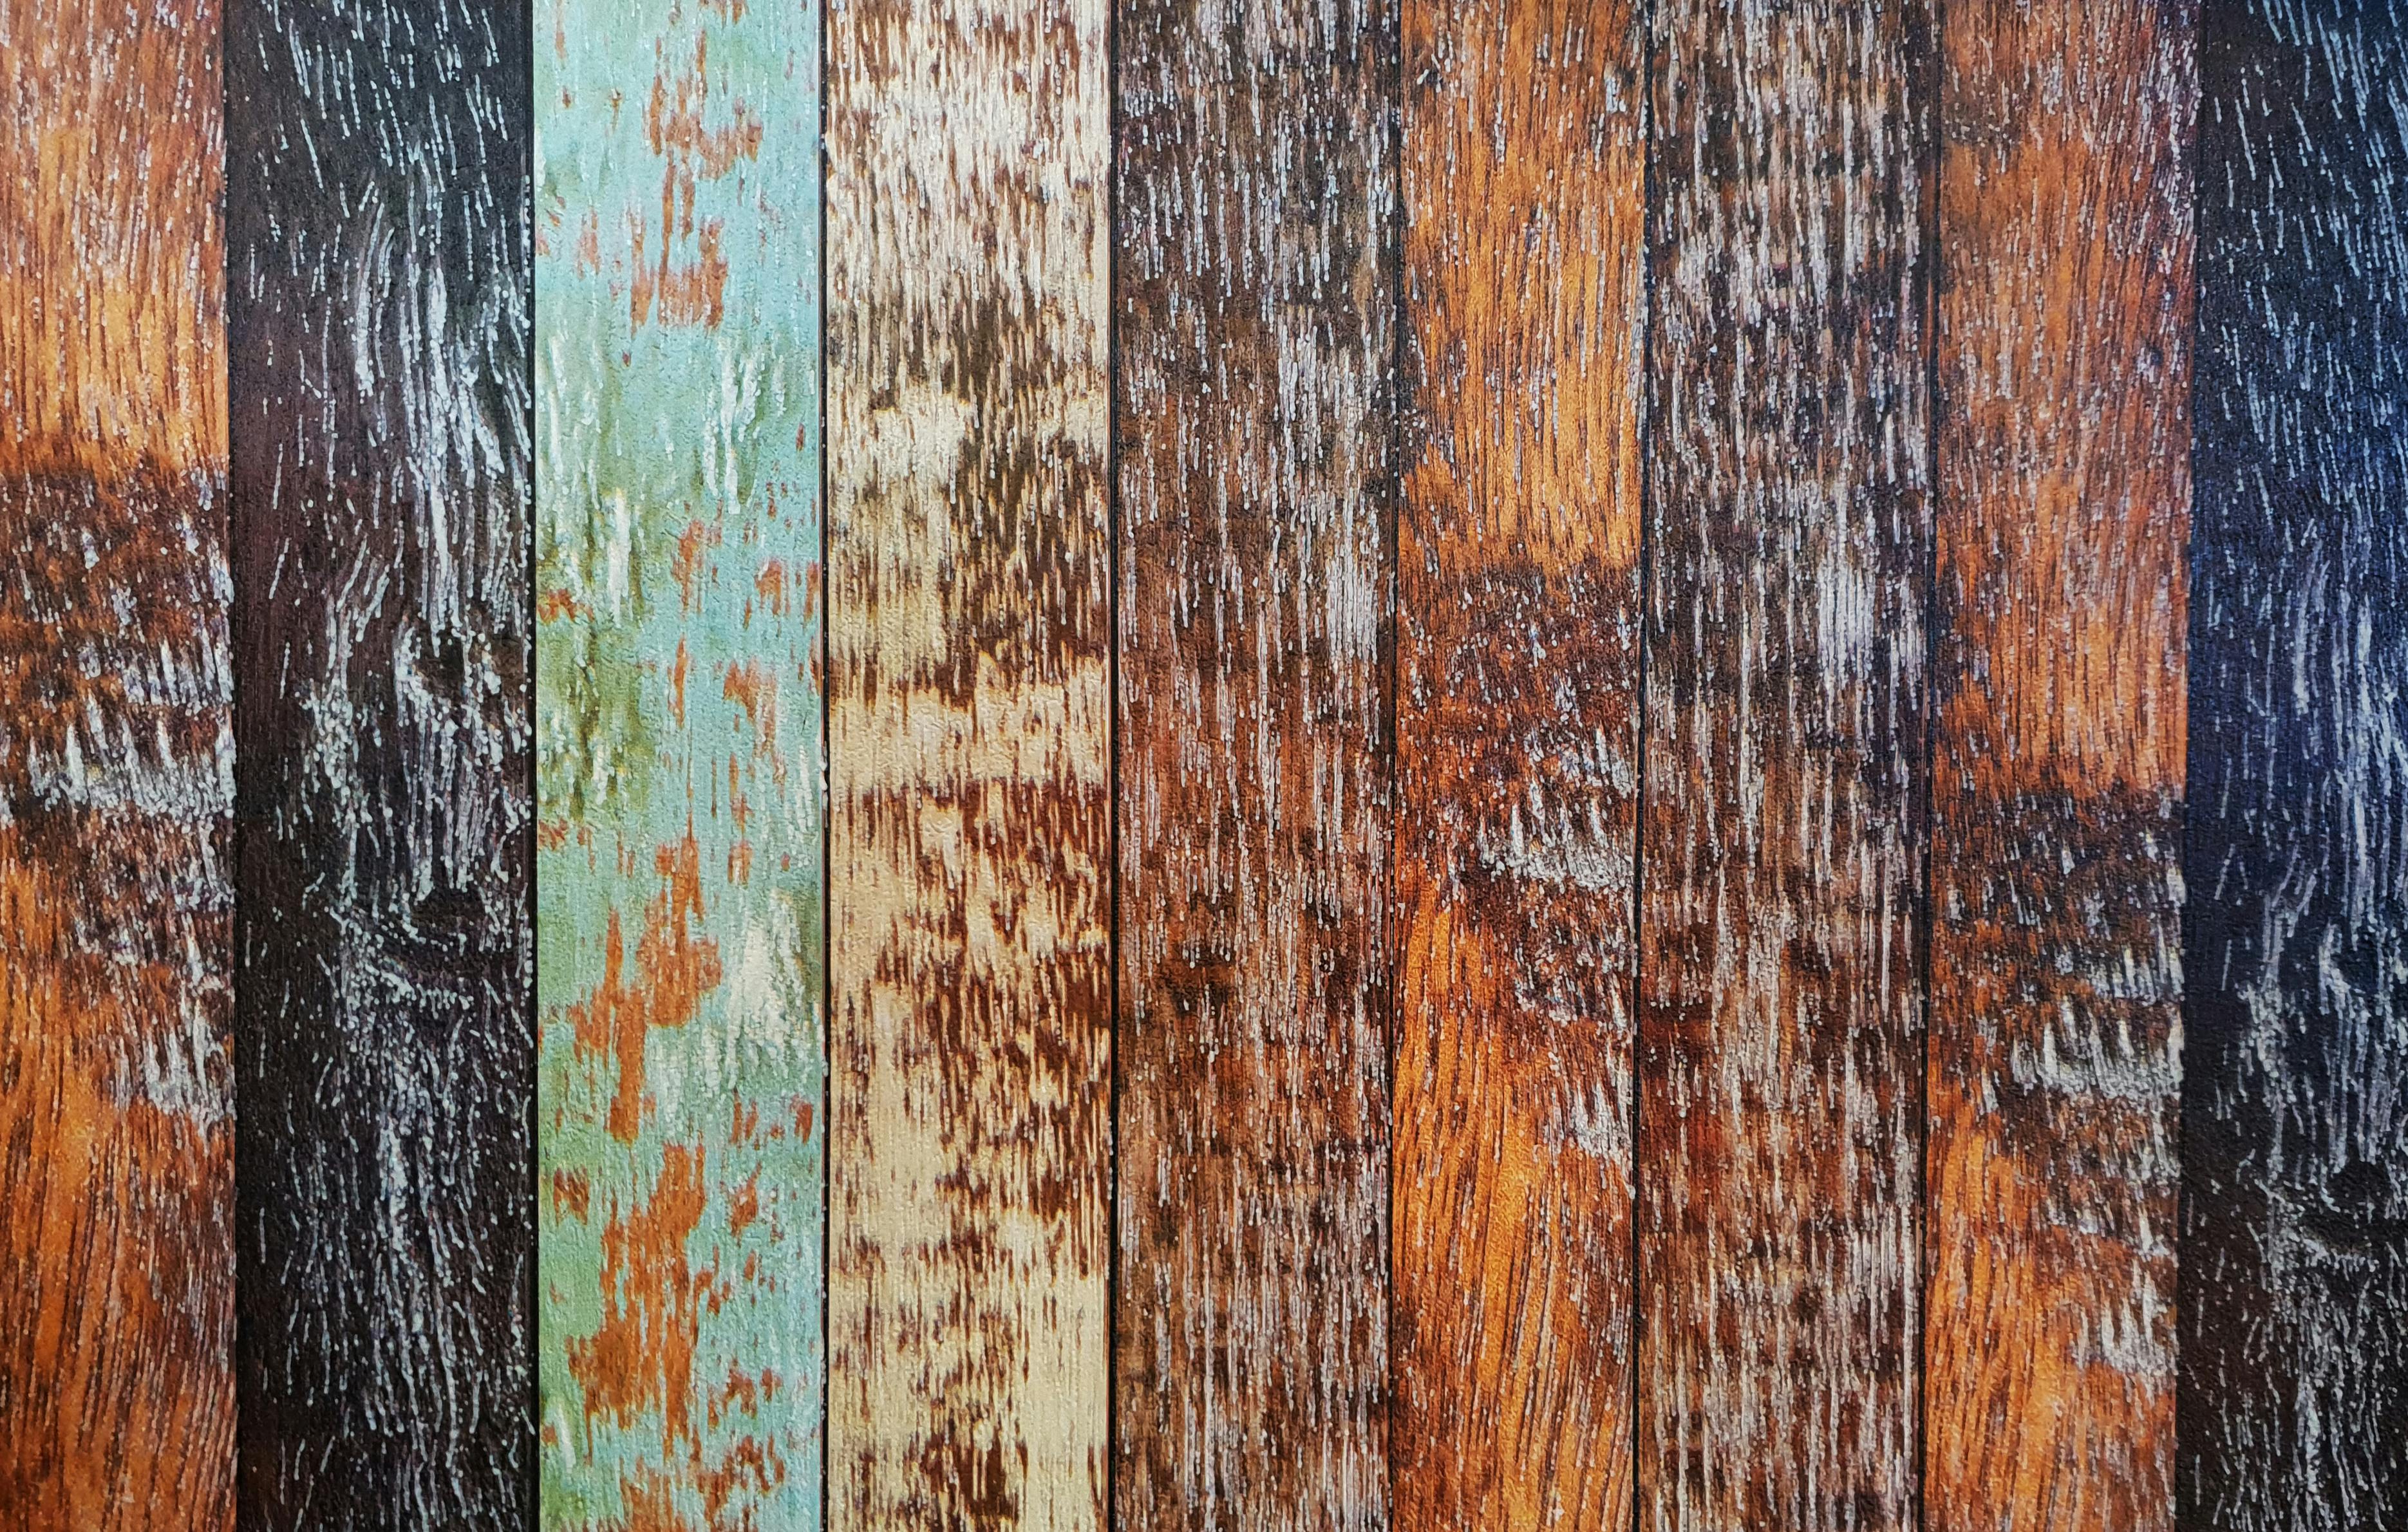 Computer apple wood iPhone 6 wallpapers HD and 1080P 6 Plus Wallpapers